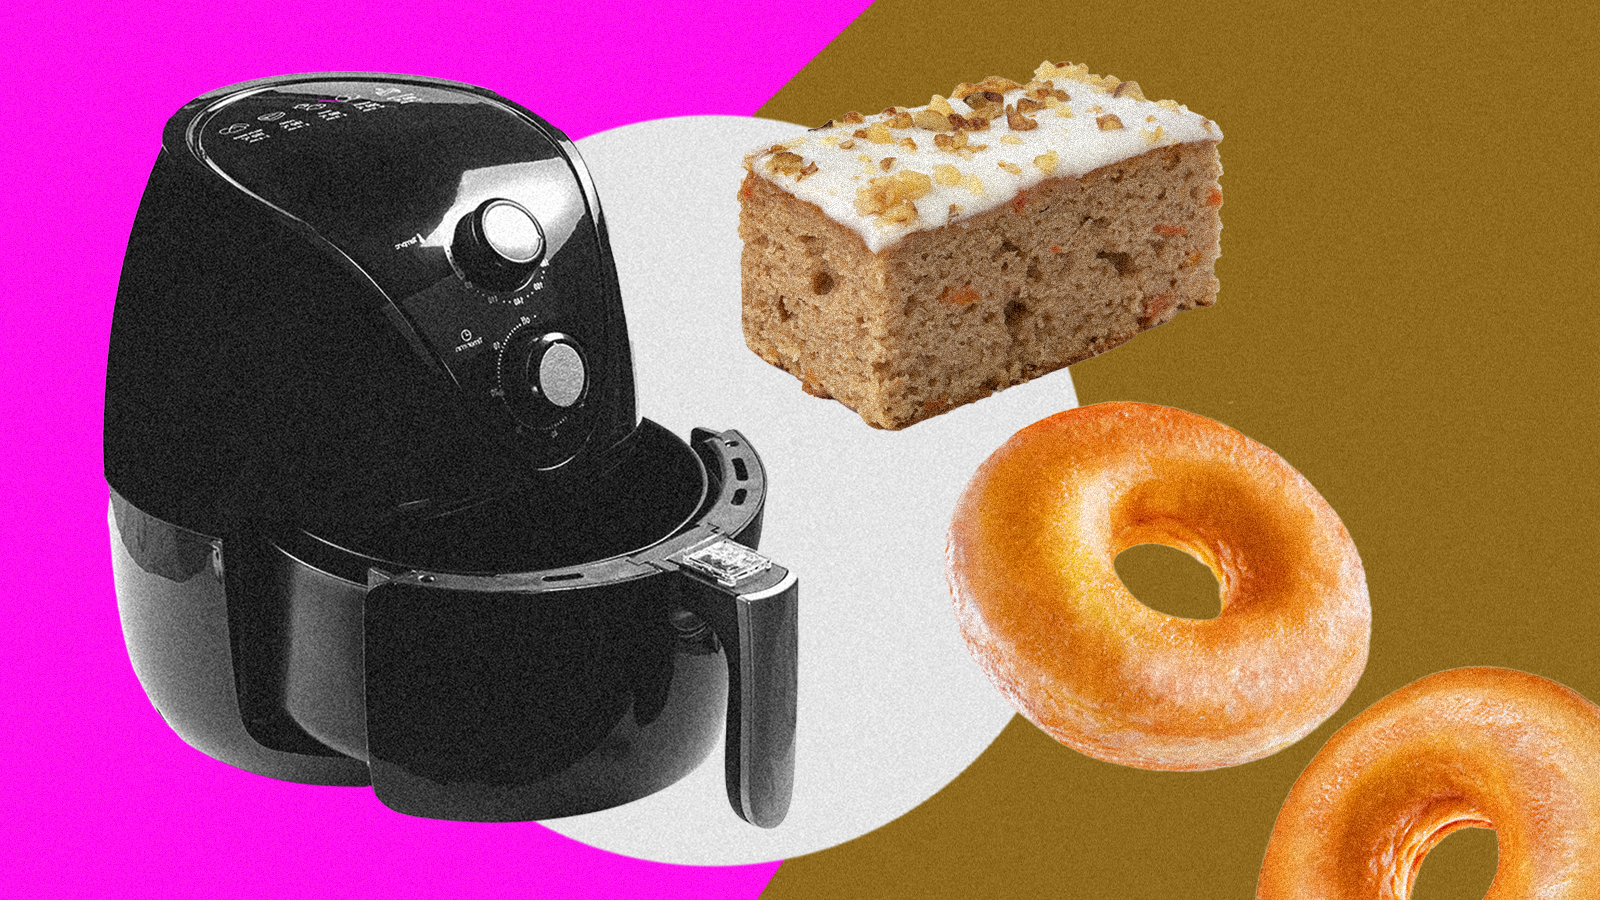 An air fryer next to some bagels and a loaf cake. Photo illustration.